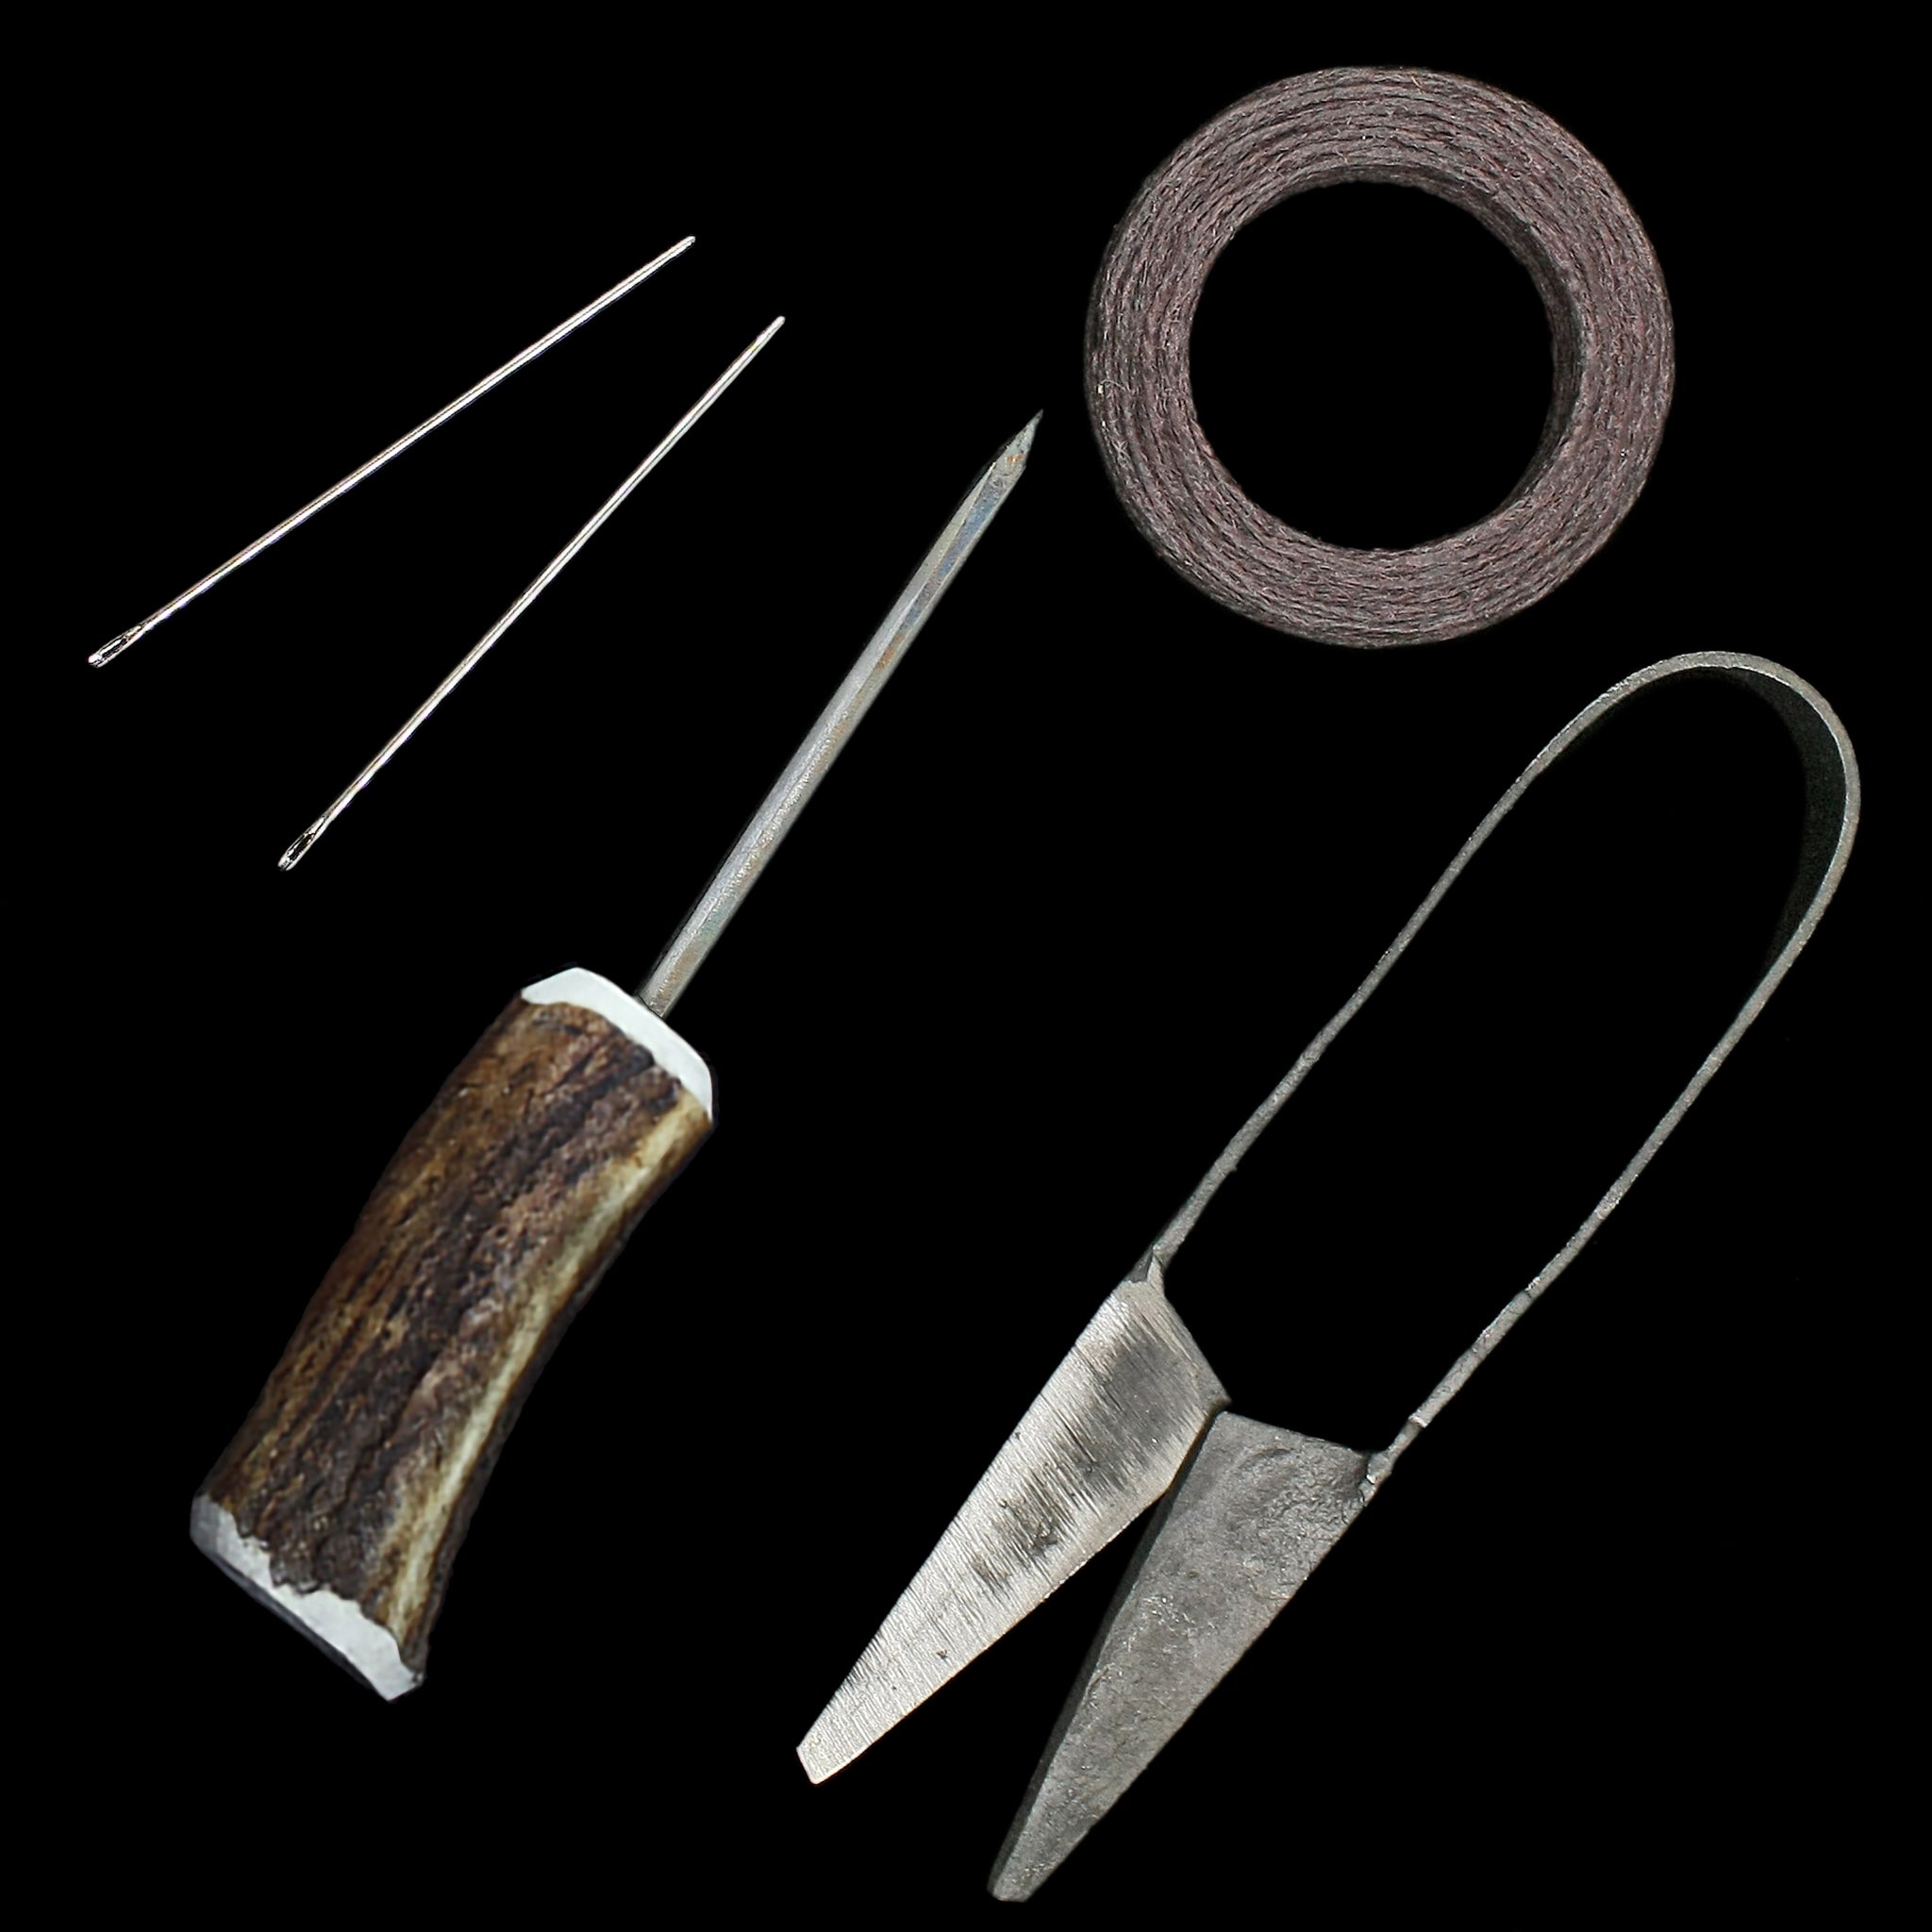 Leather Viking Sewing Kit with Antler Awl, Harness Needles, Waxed Linen Thread, Steel Snips